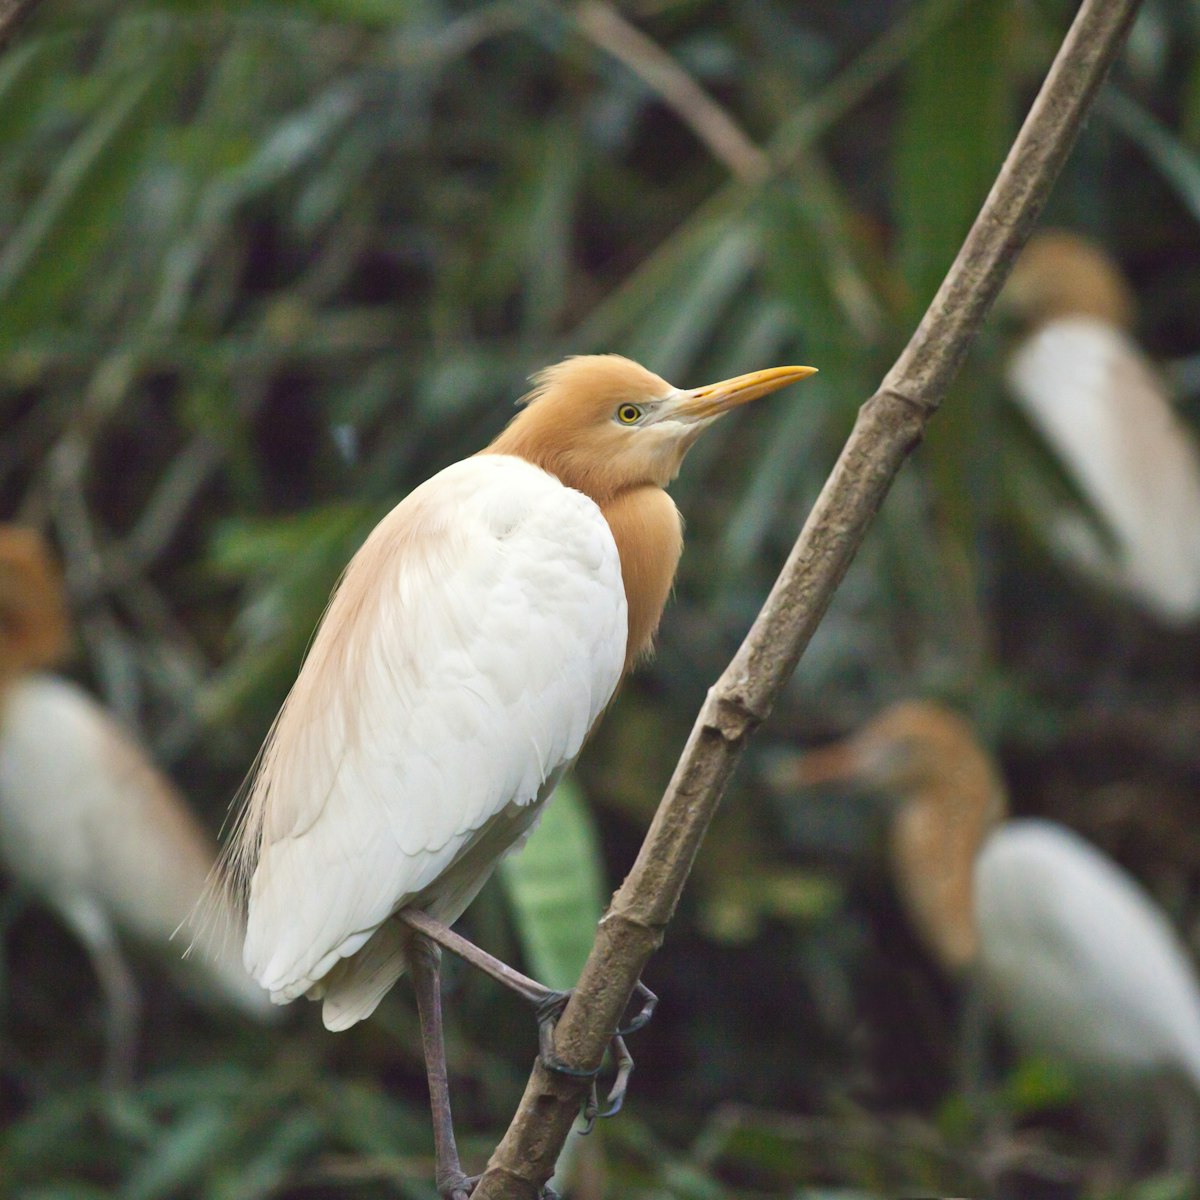 The Sacred Cattle Egrets (Bubulcus Ibis) Of Petulu Come To Roost And Nest In The Trees Each Night, Ubud, Bali. (Photo By: Education Images/UIG via Getty Images)